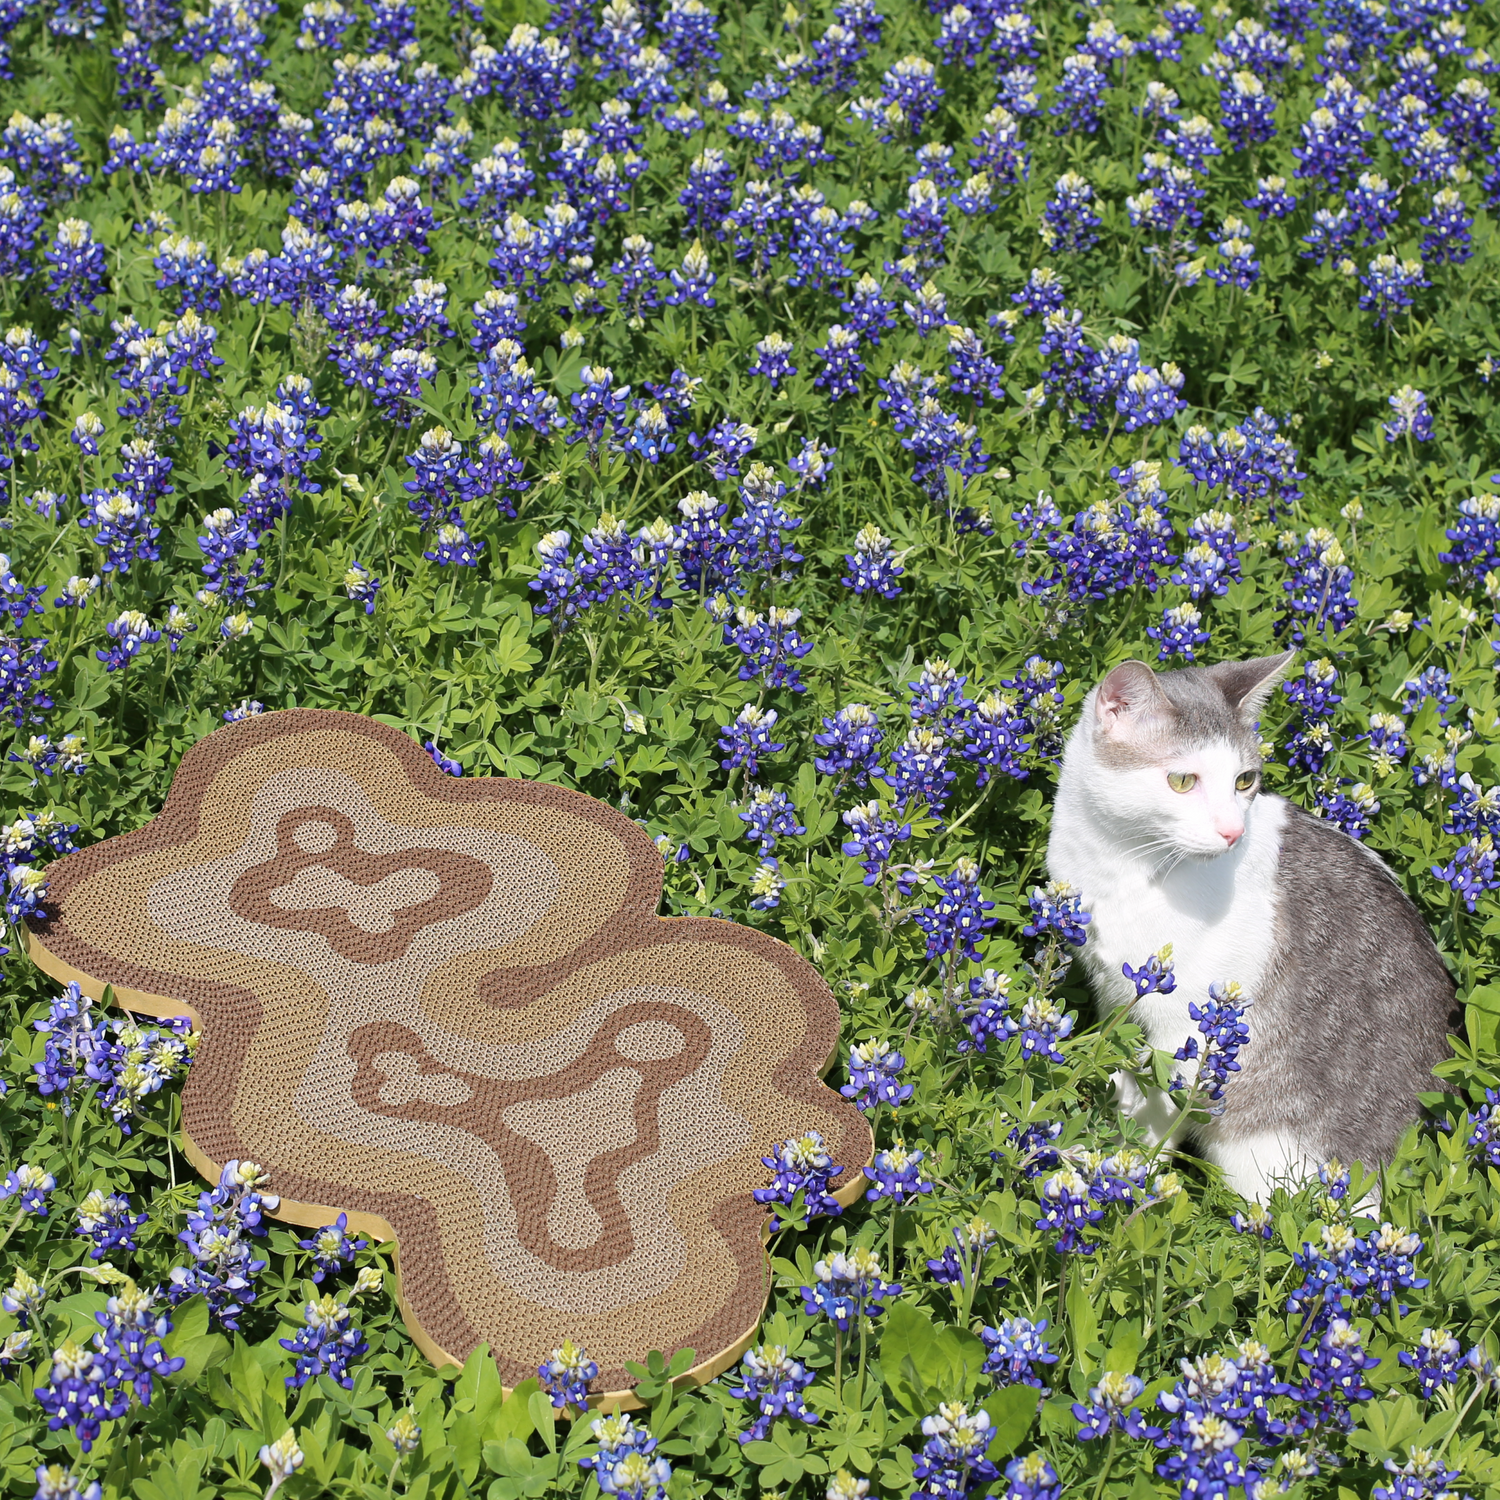 modern cat scratcher and cat scratching board in field of blue bonnet flowers with grey and white cat